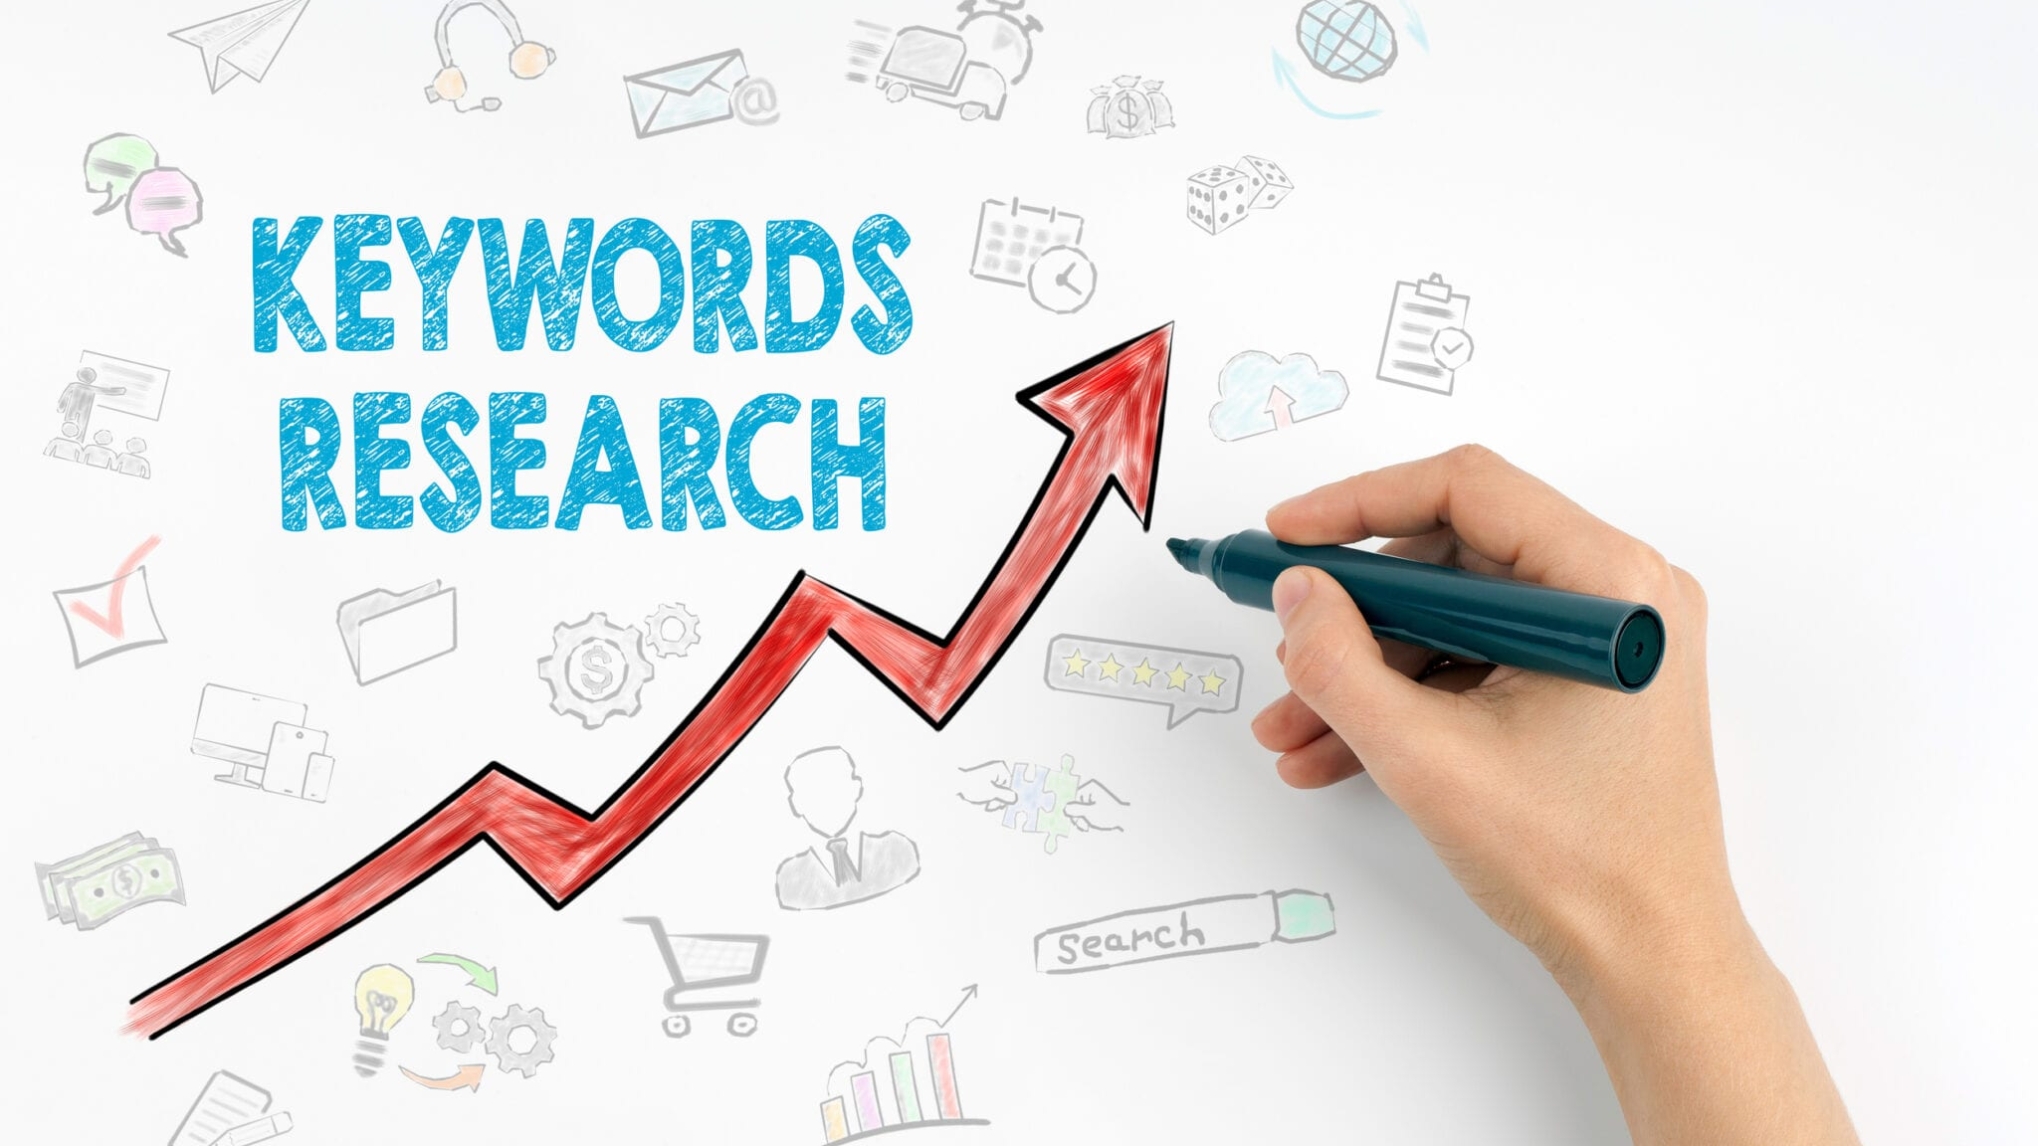 How To Effectively Use Keywords To Attract Customers Idashboard Blog 4786